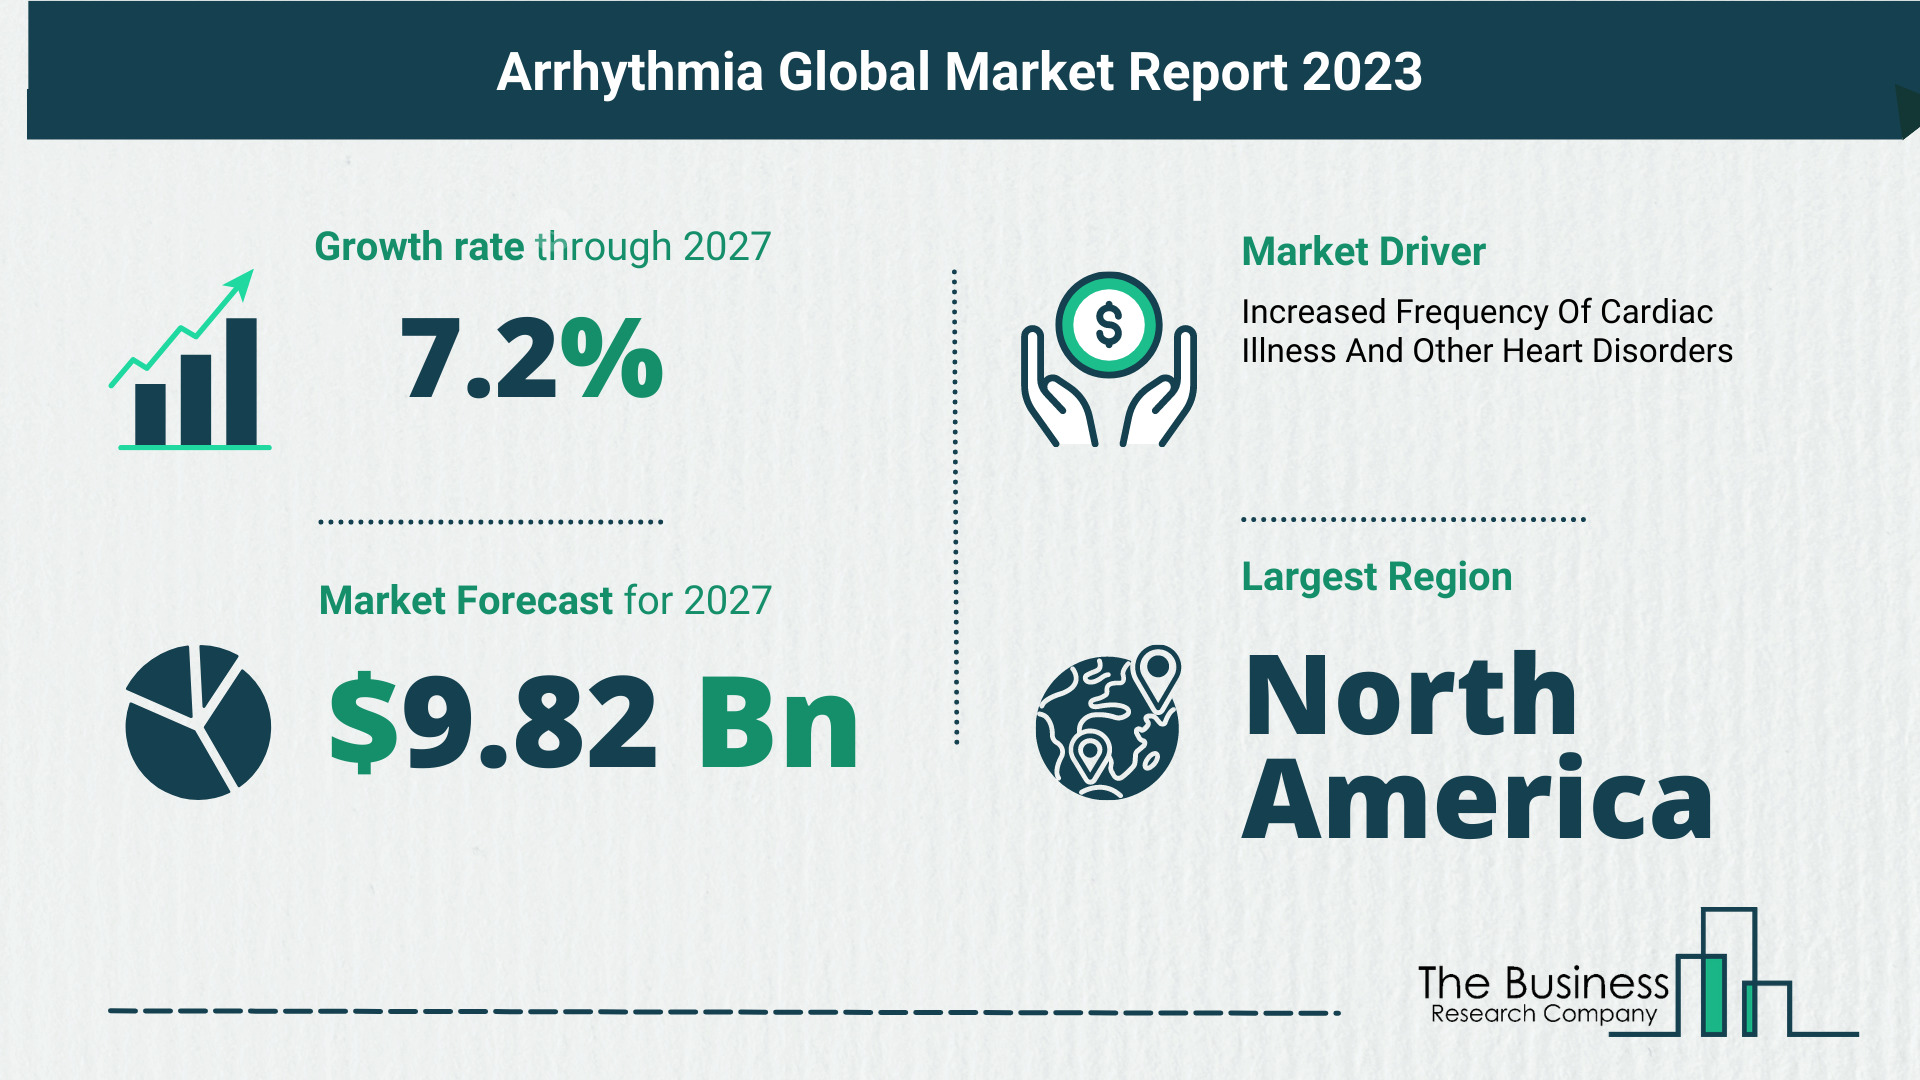 Global Arrhythmia Market Analysis 2023: Size, Share, And Key Trends